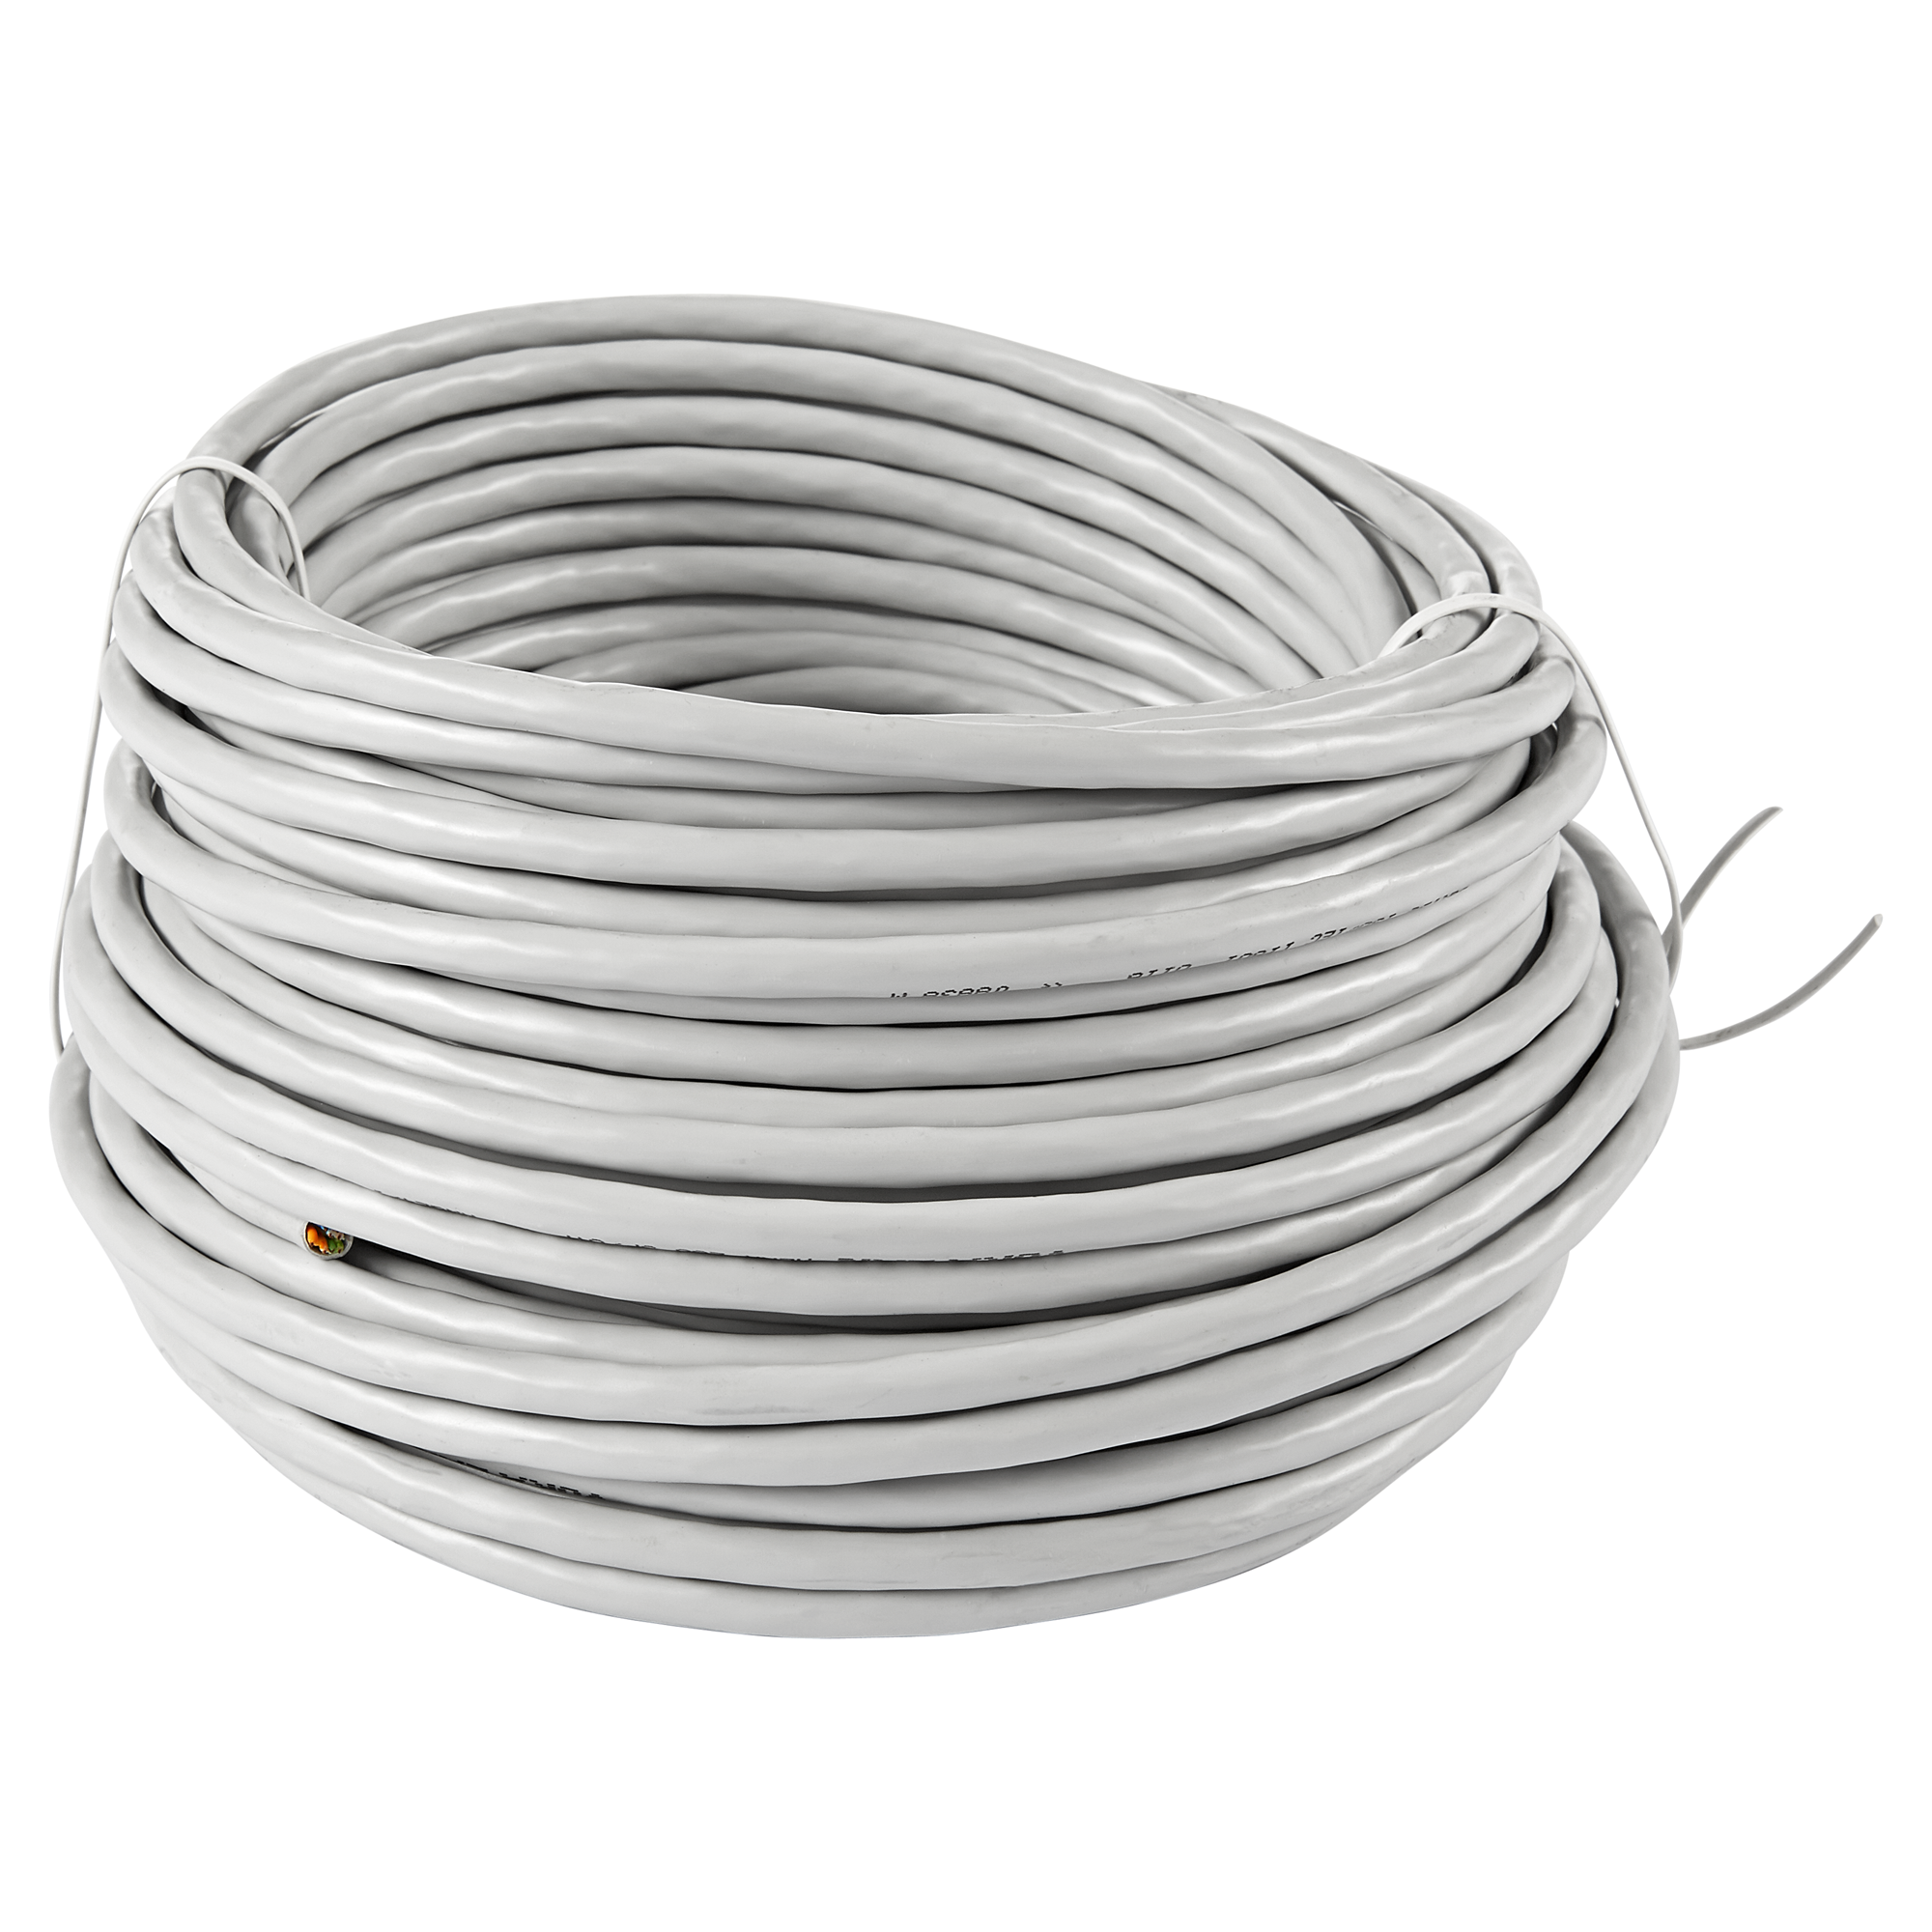 Datenkabel CAT 5e 25 m + product picture